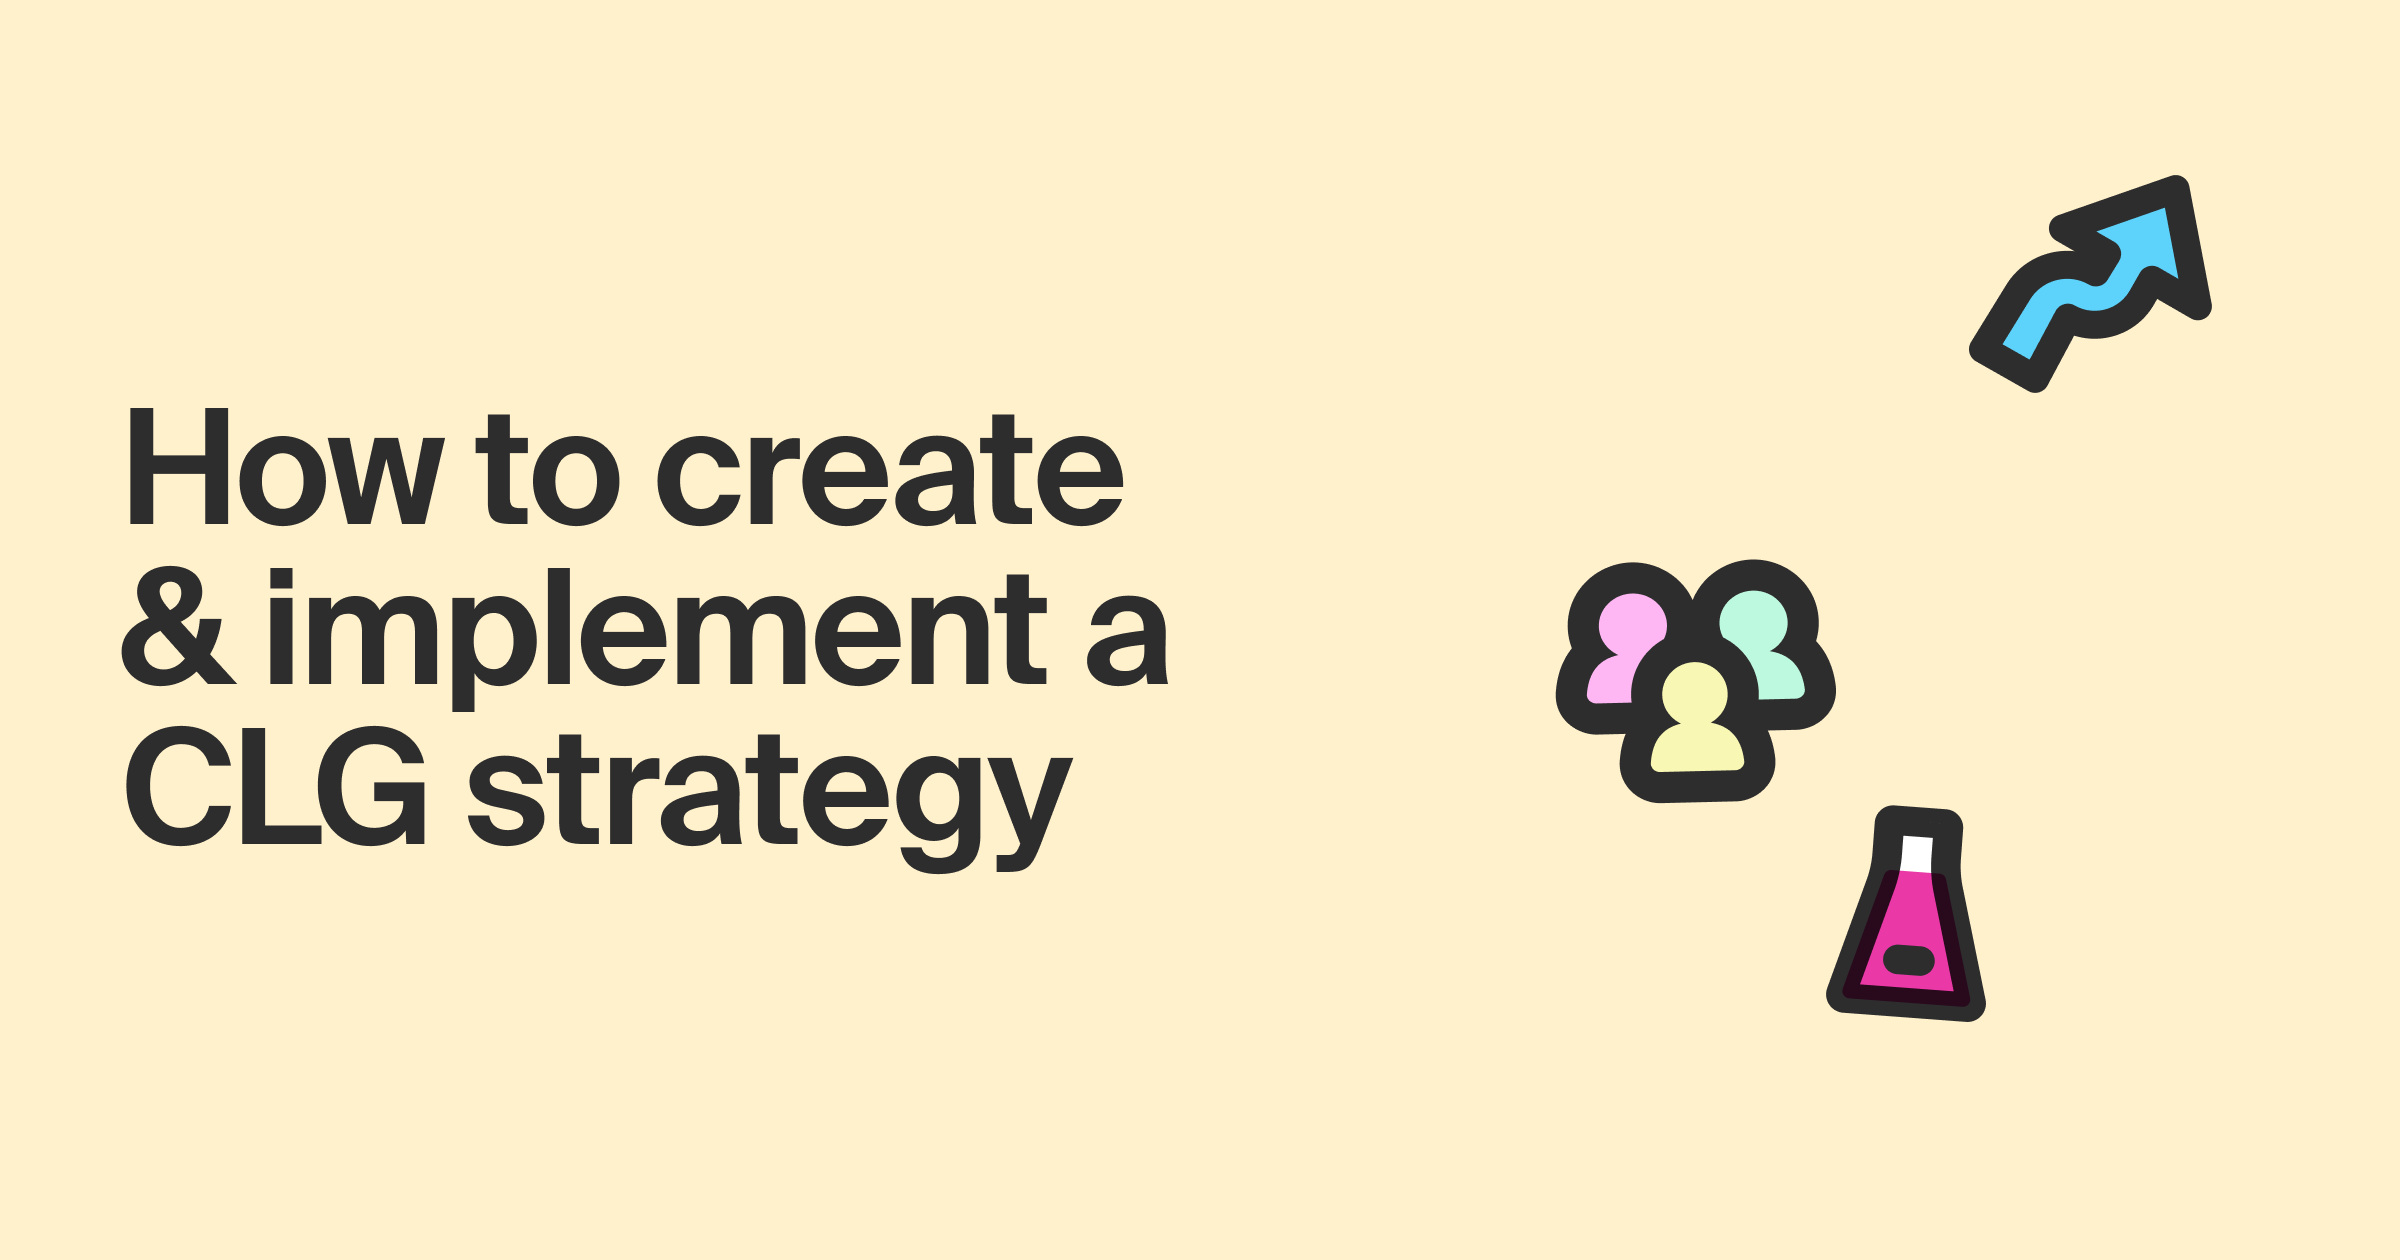 How to create and implement a CLG strategy